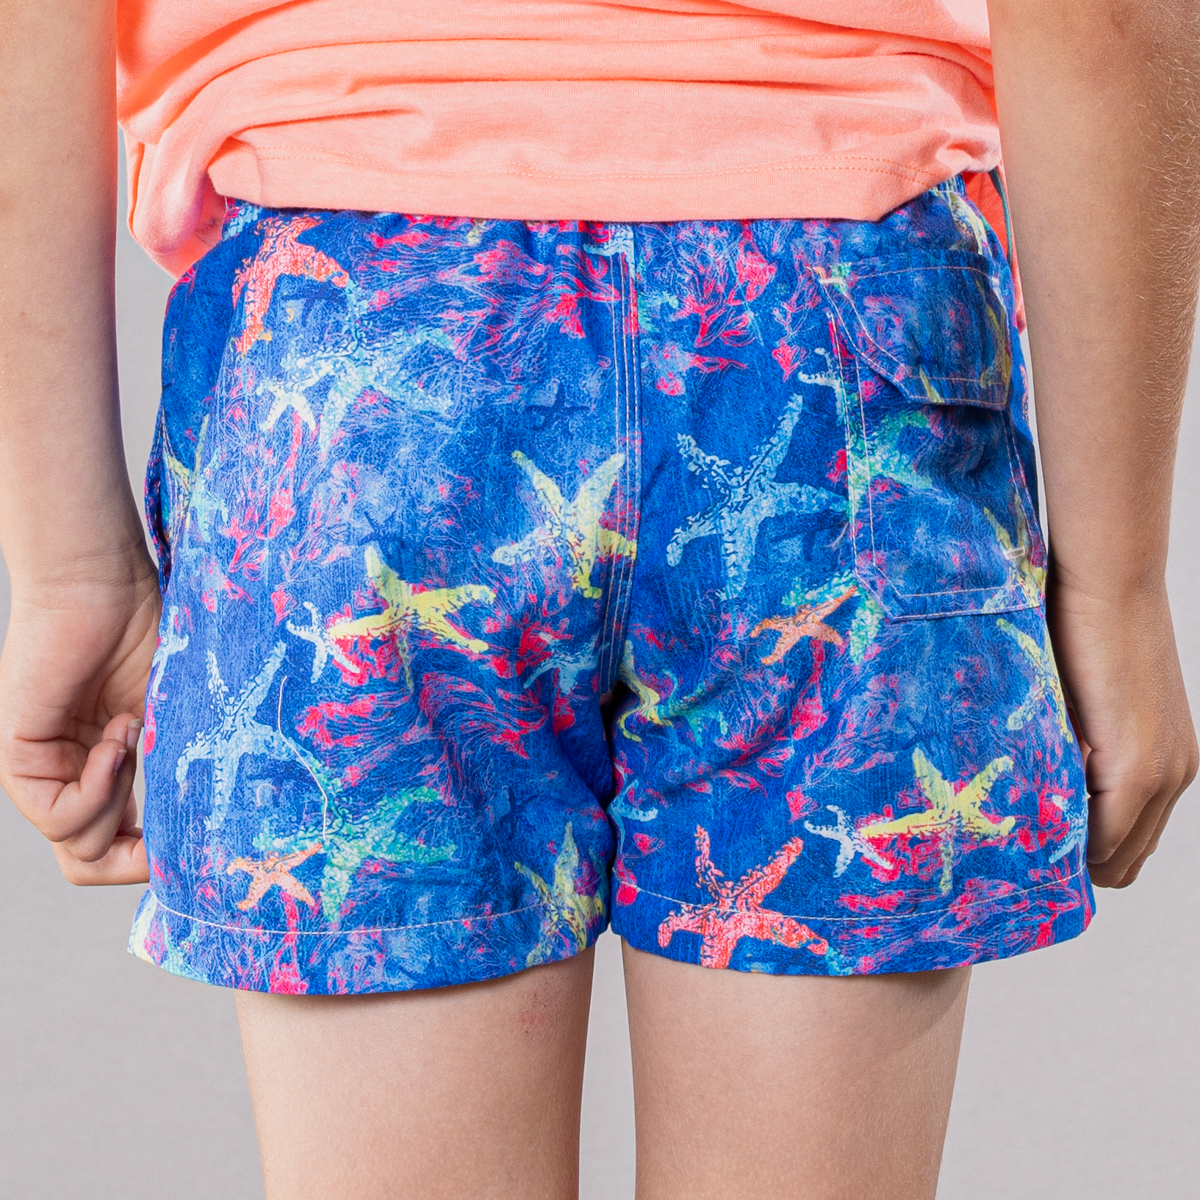 Navy swim trunks with starfish pattern for boys, back view